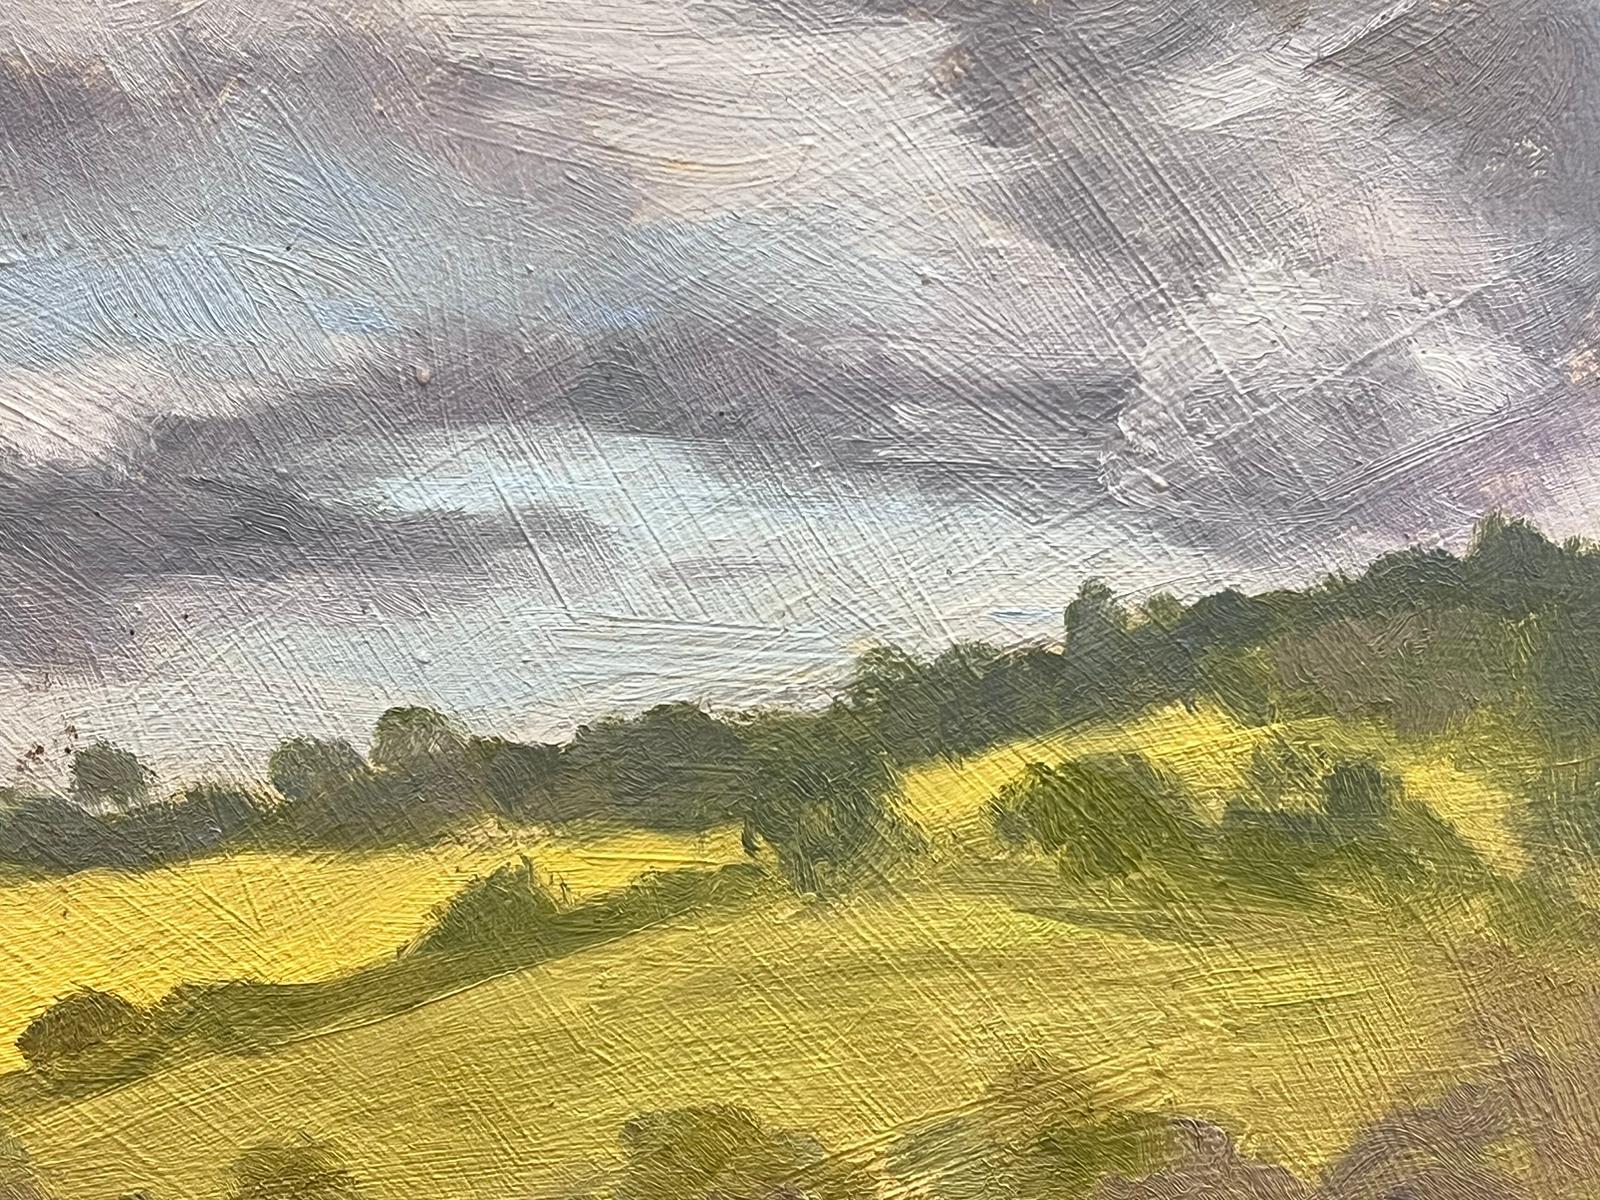 Landscape  
by Geza Somerset-Paddon (British 20th century)
oil painting on board, unframed
size: 6.75 x 10 inches
inscribed verso
condition: overall very good
provenance: all the paintings we have by this artist have come from their studio sale in